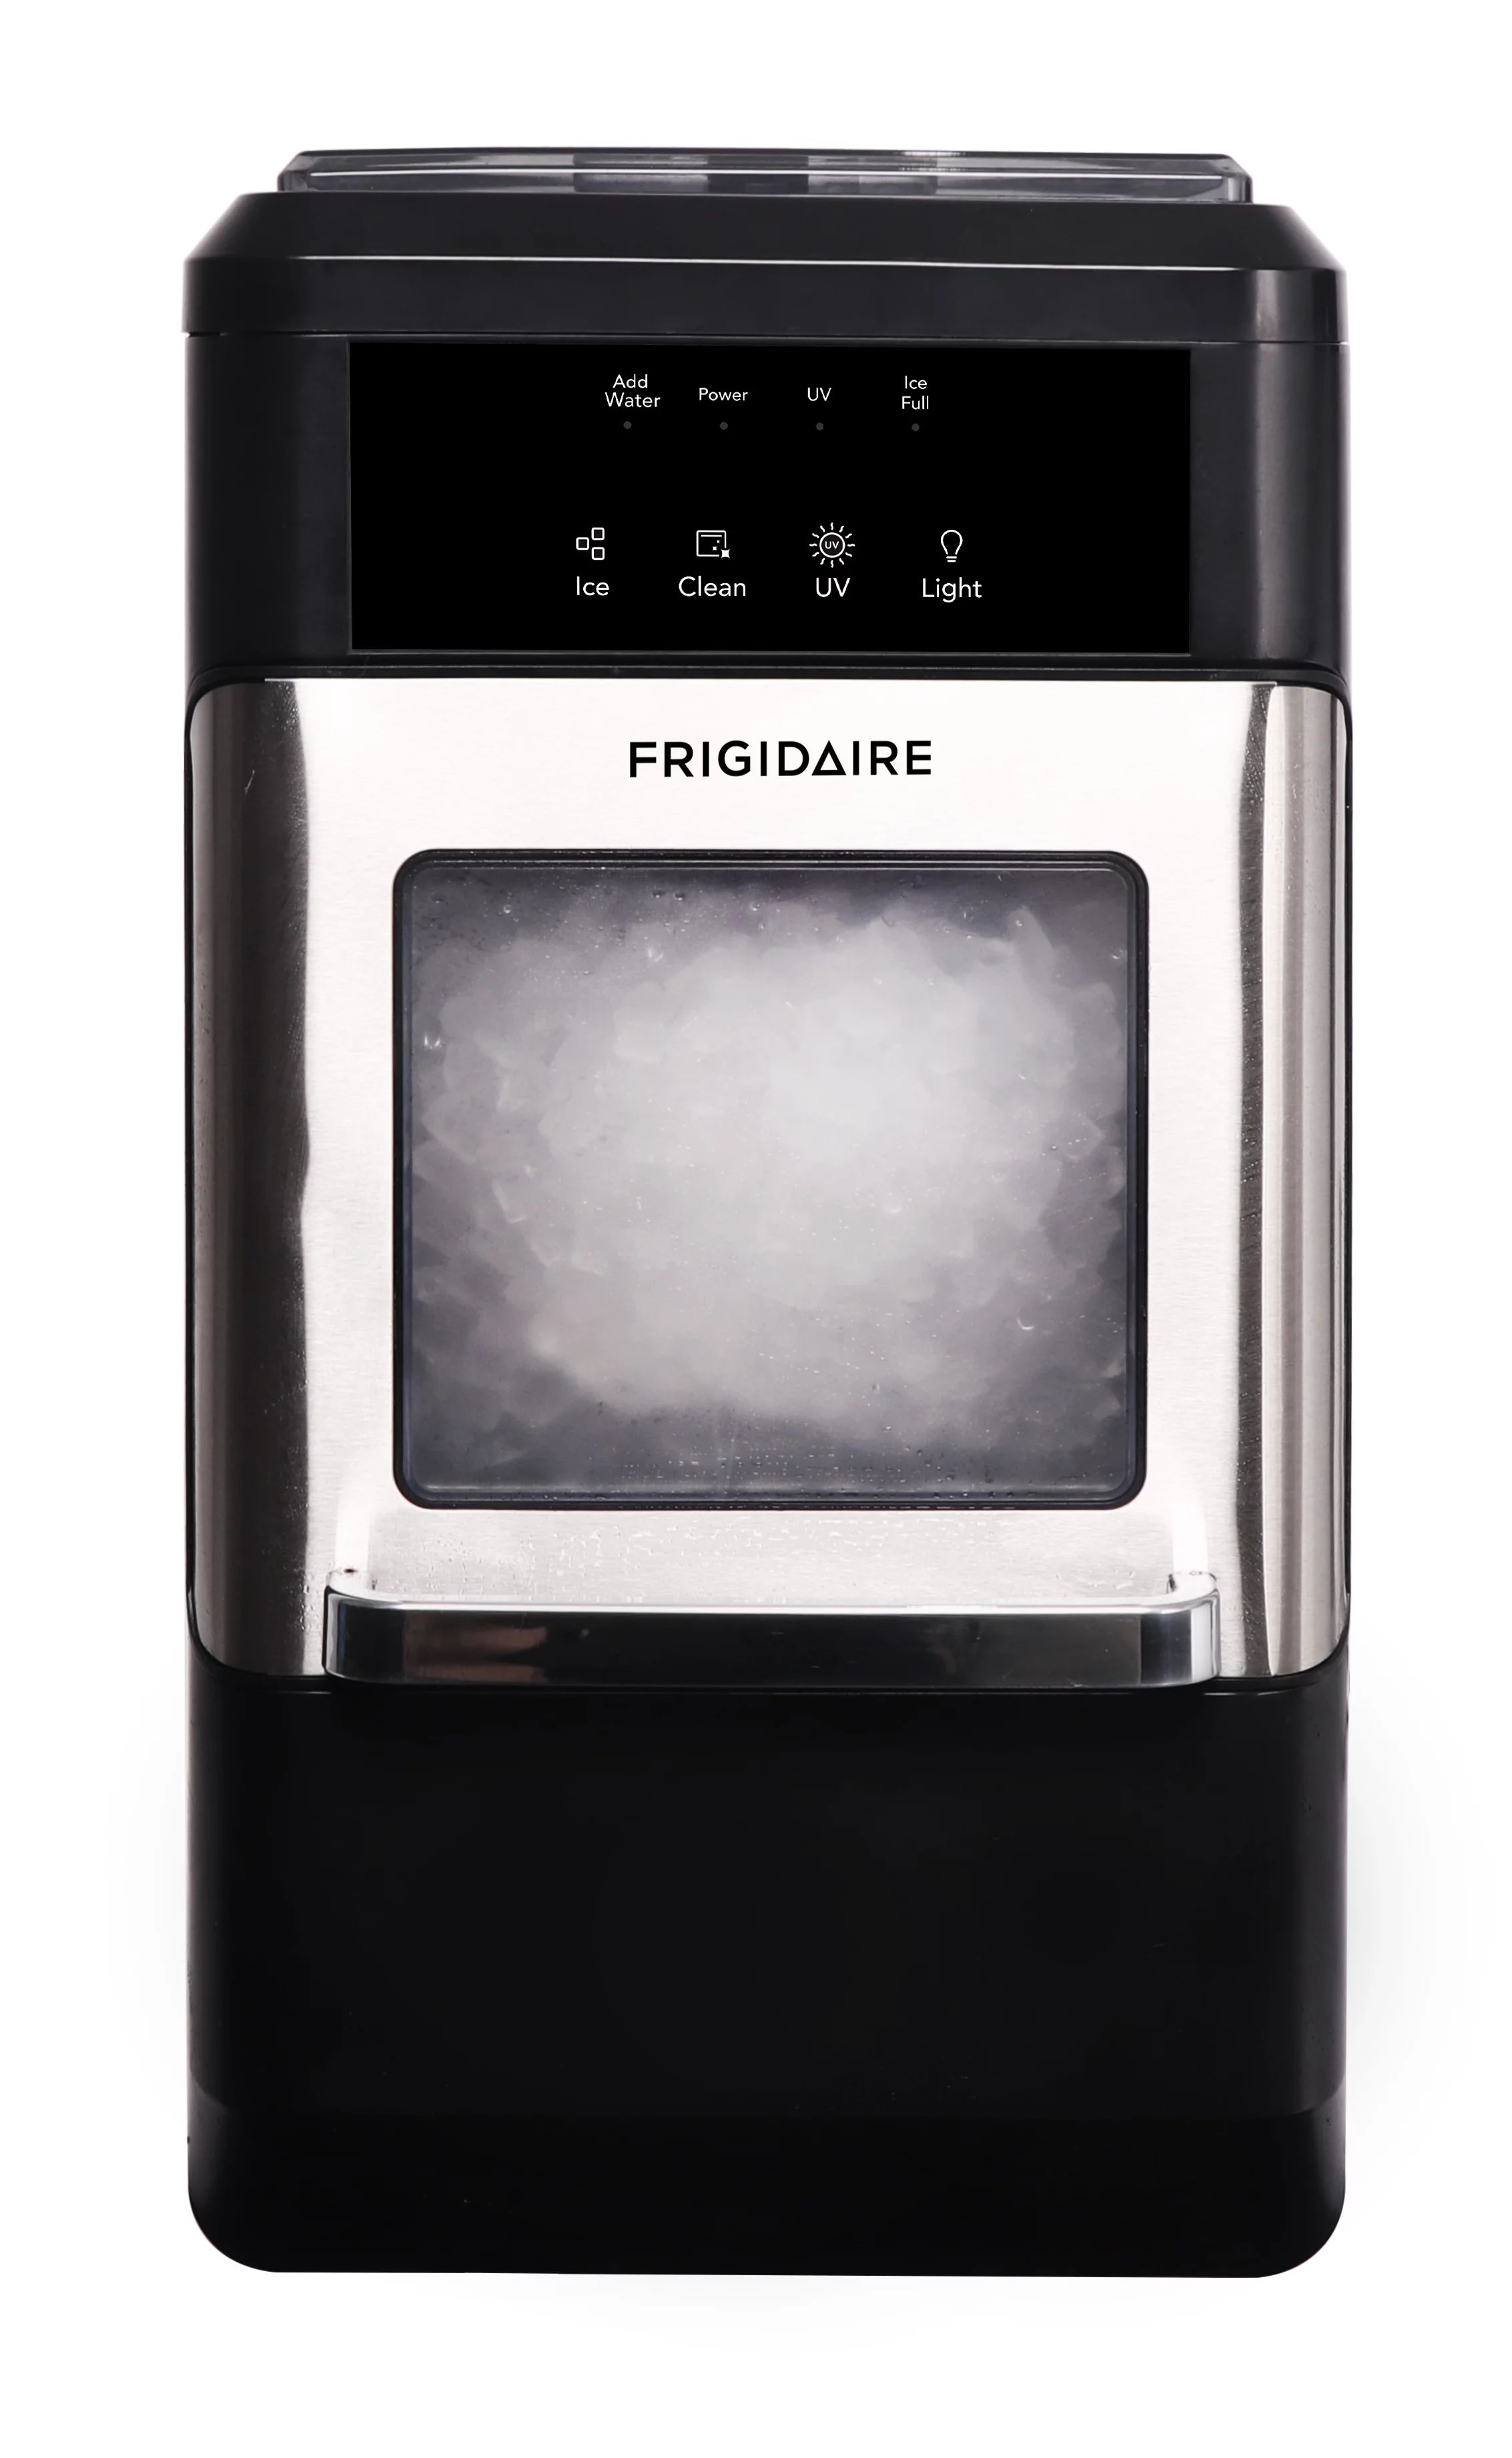 Frigidaire 44 lbs. Crunchy Chewable Nugget Ice Maker EFIC235, Stainless Steel | Walmart (US)